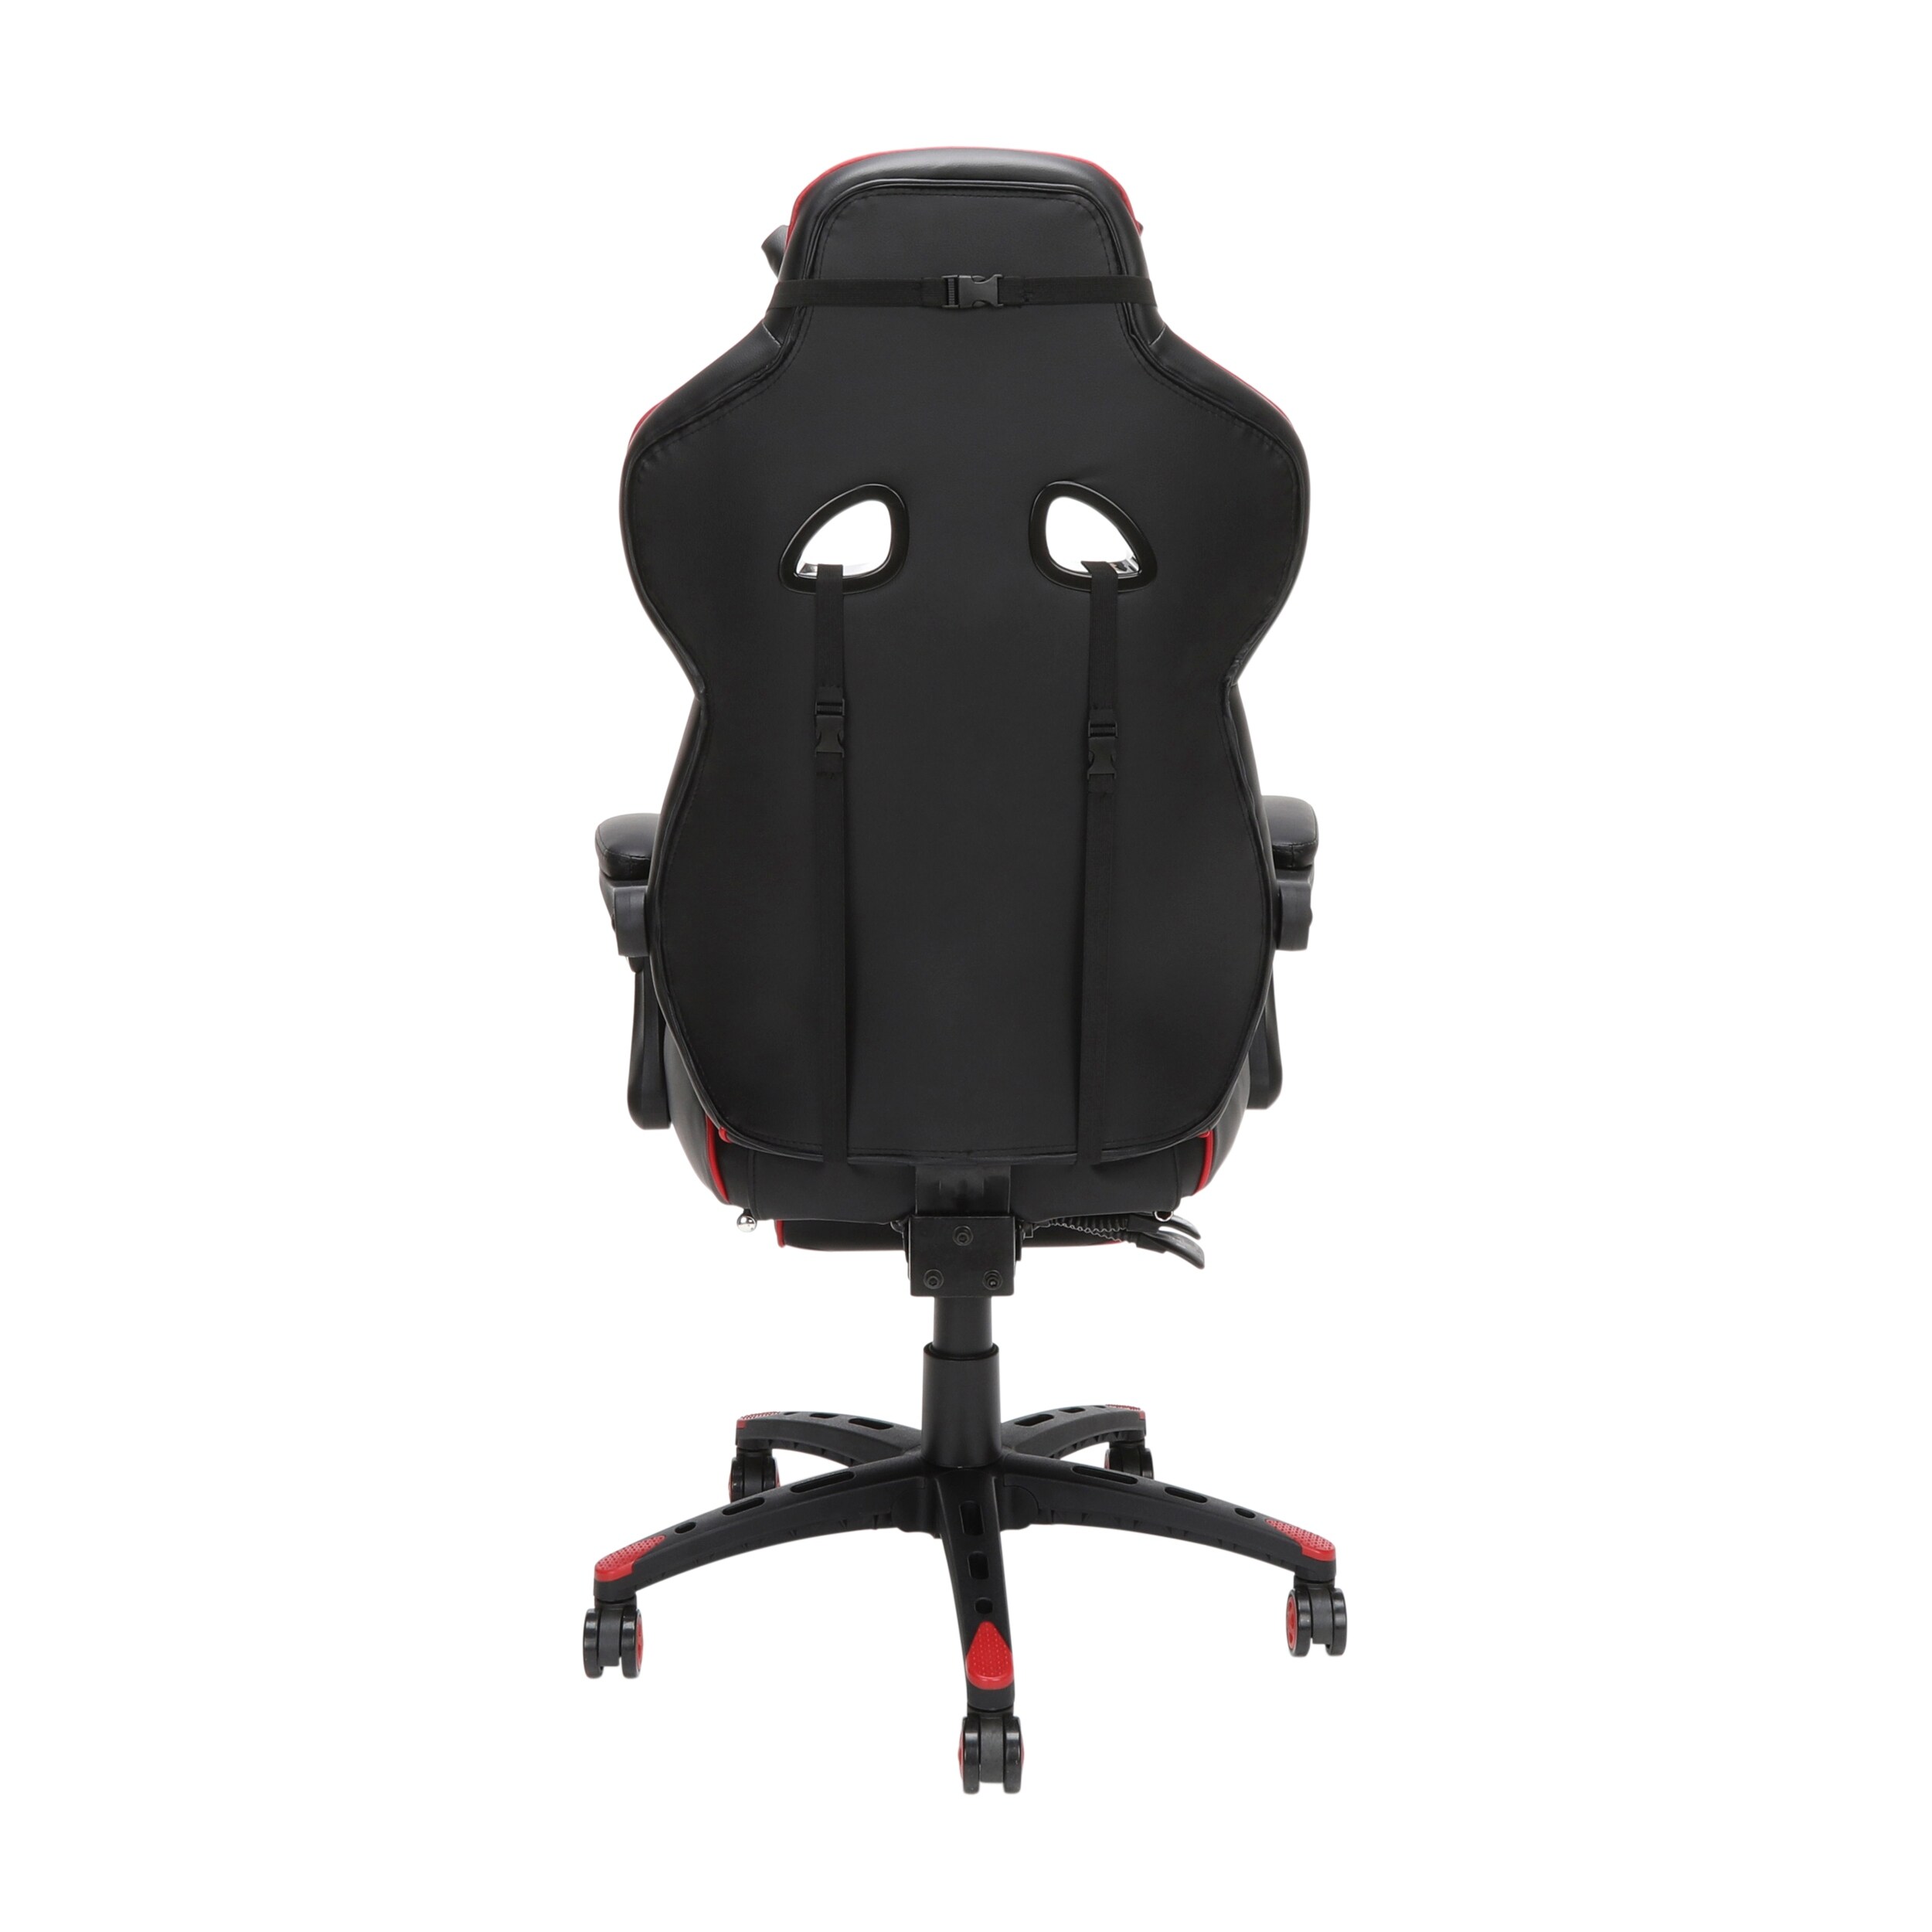 Details about   RESPAWN Racing Style Gaming Chair Reclining 360 Swivel Ergonomic Footrest Red 